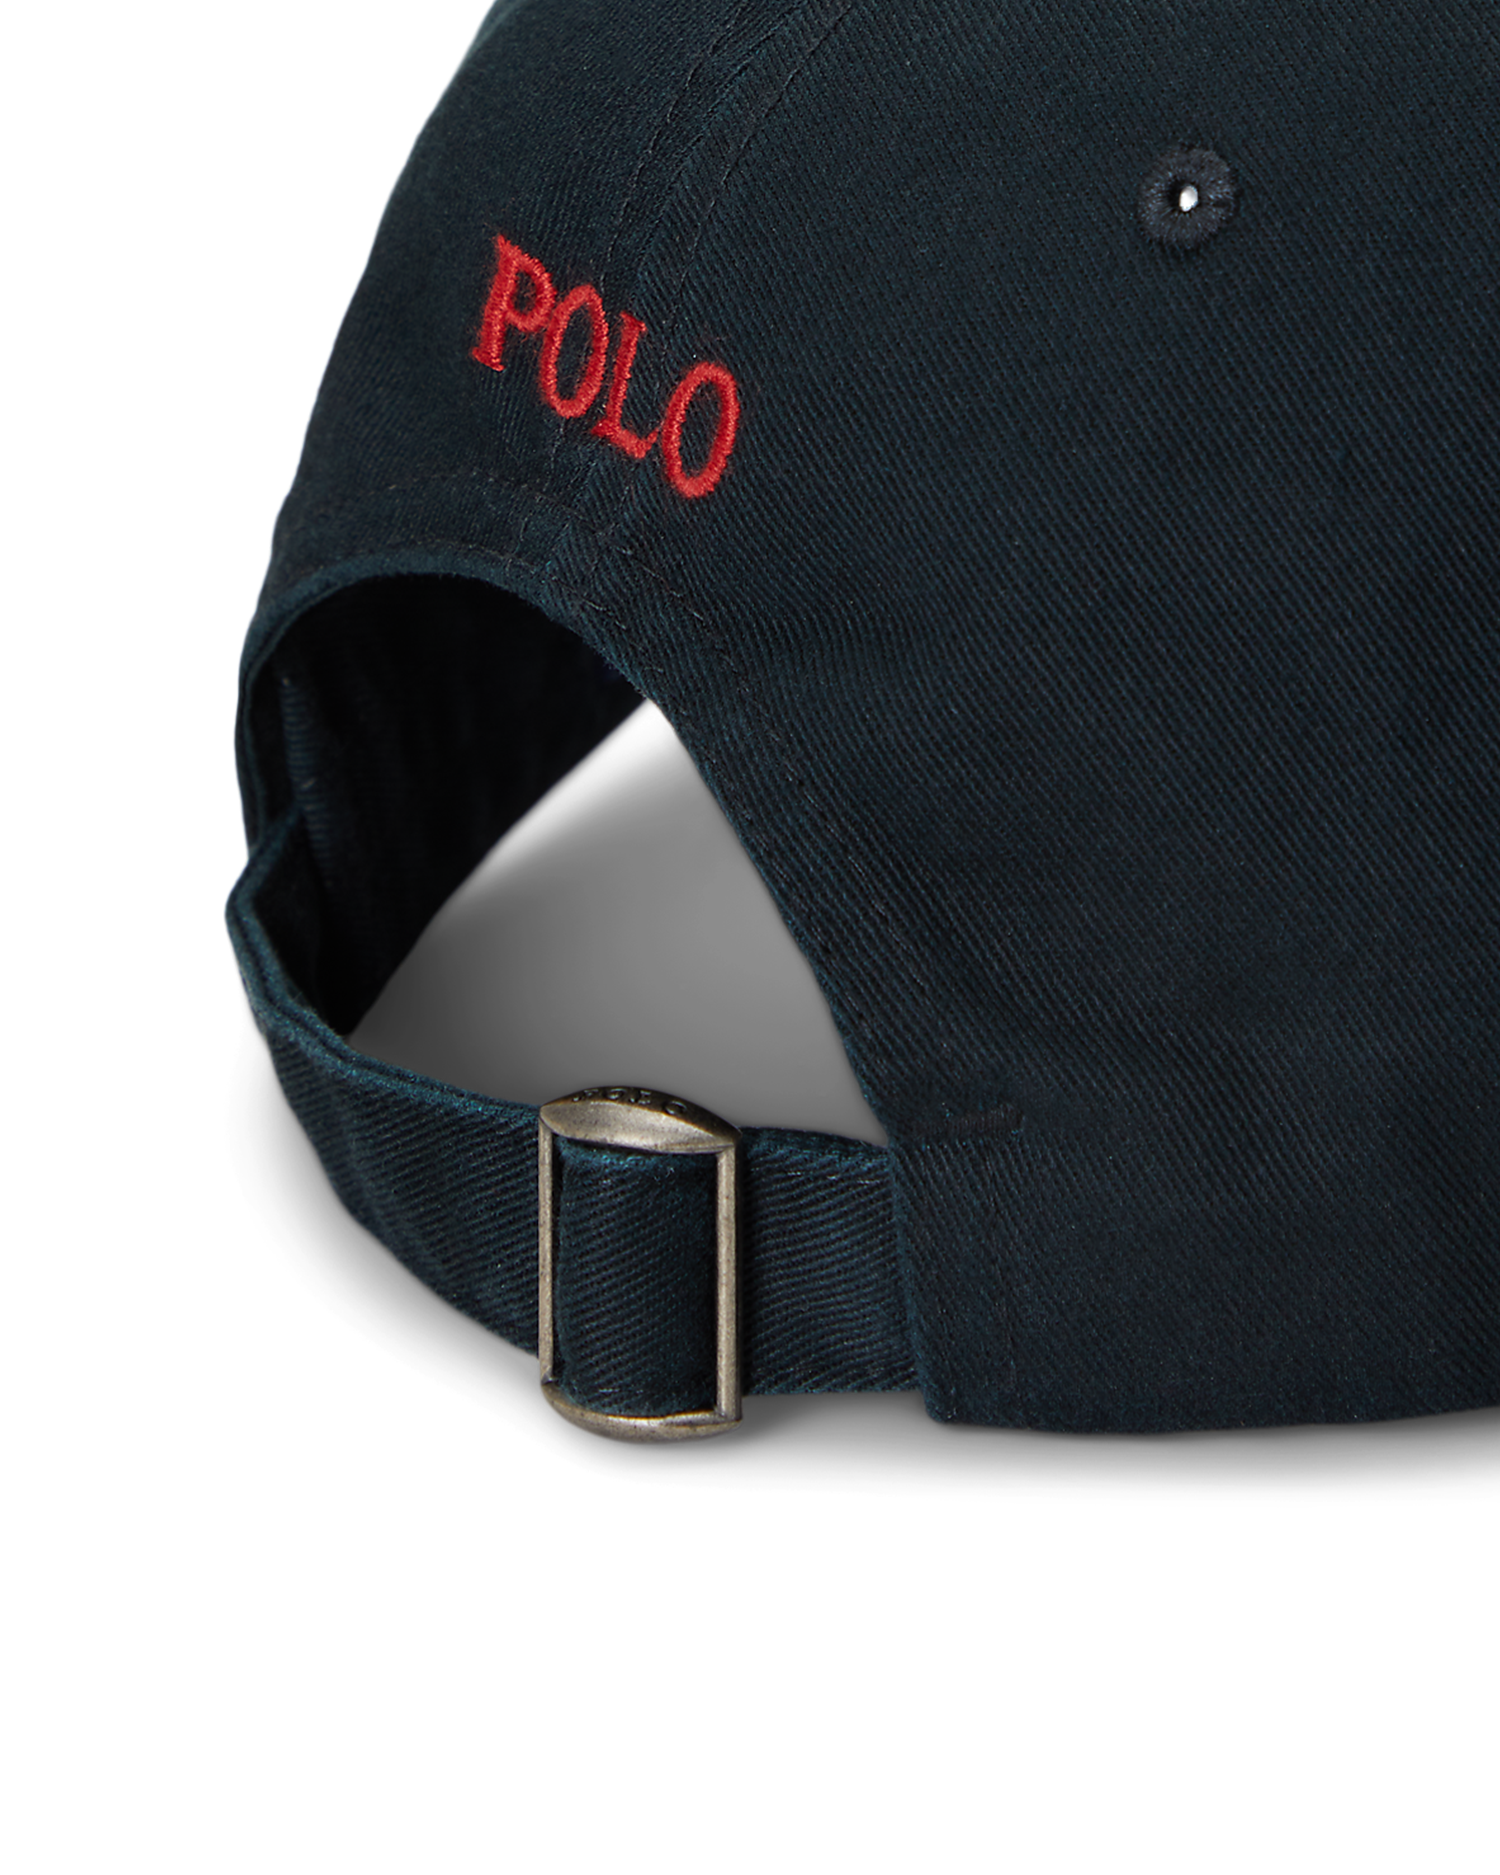 Embroidered Sports Cap - Black / Red